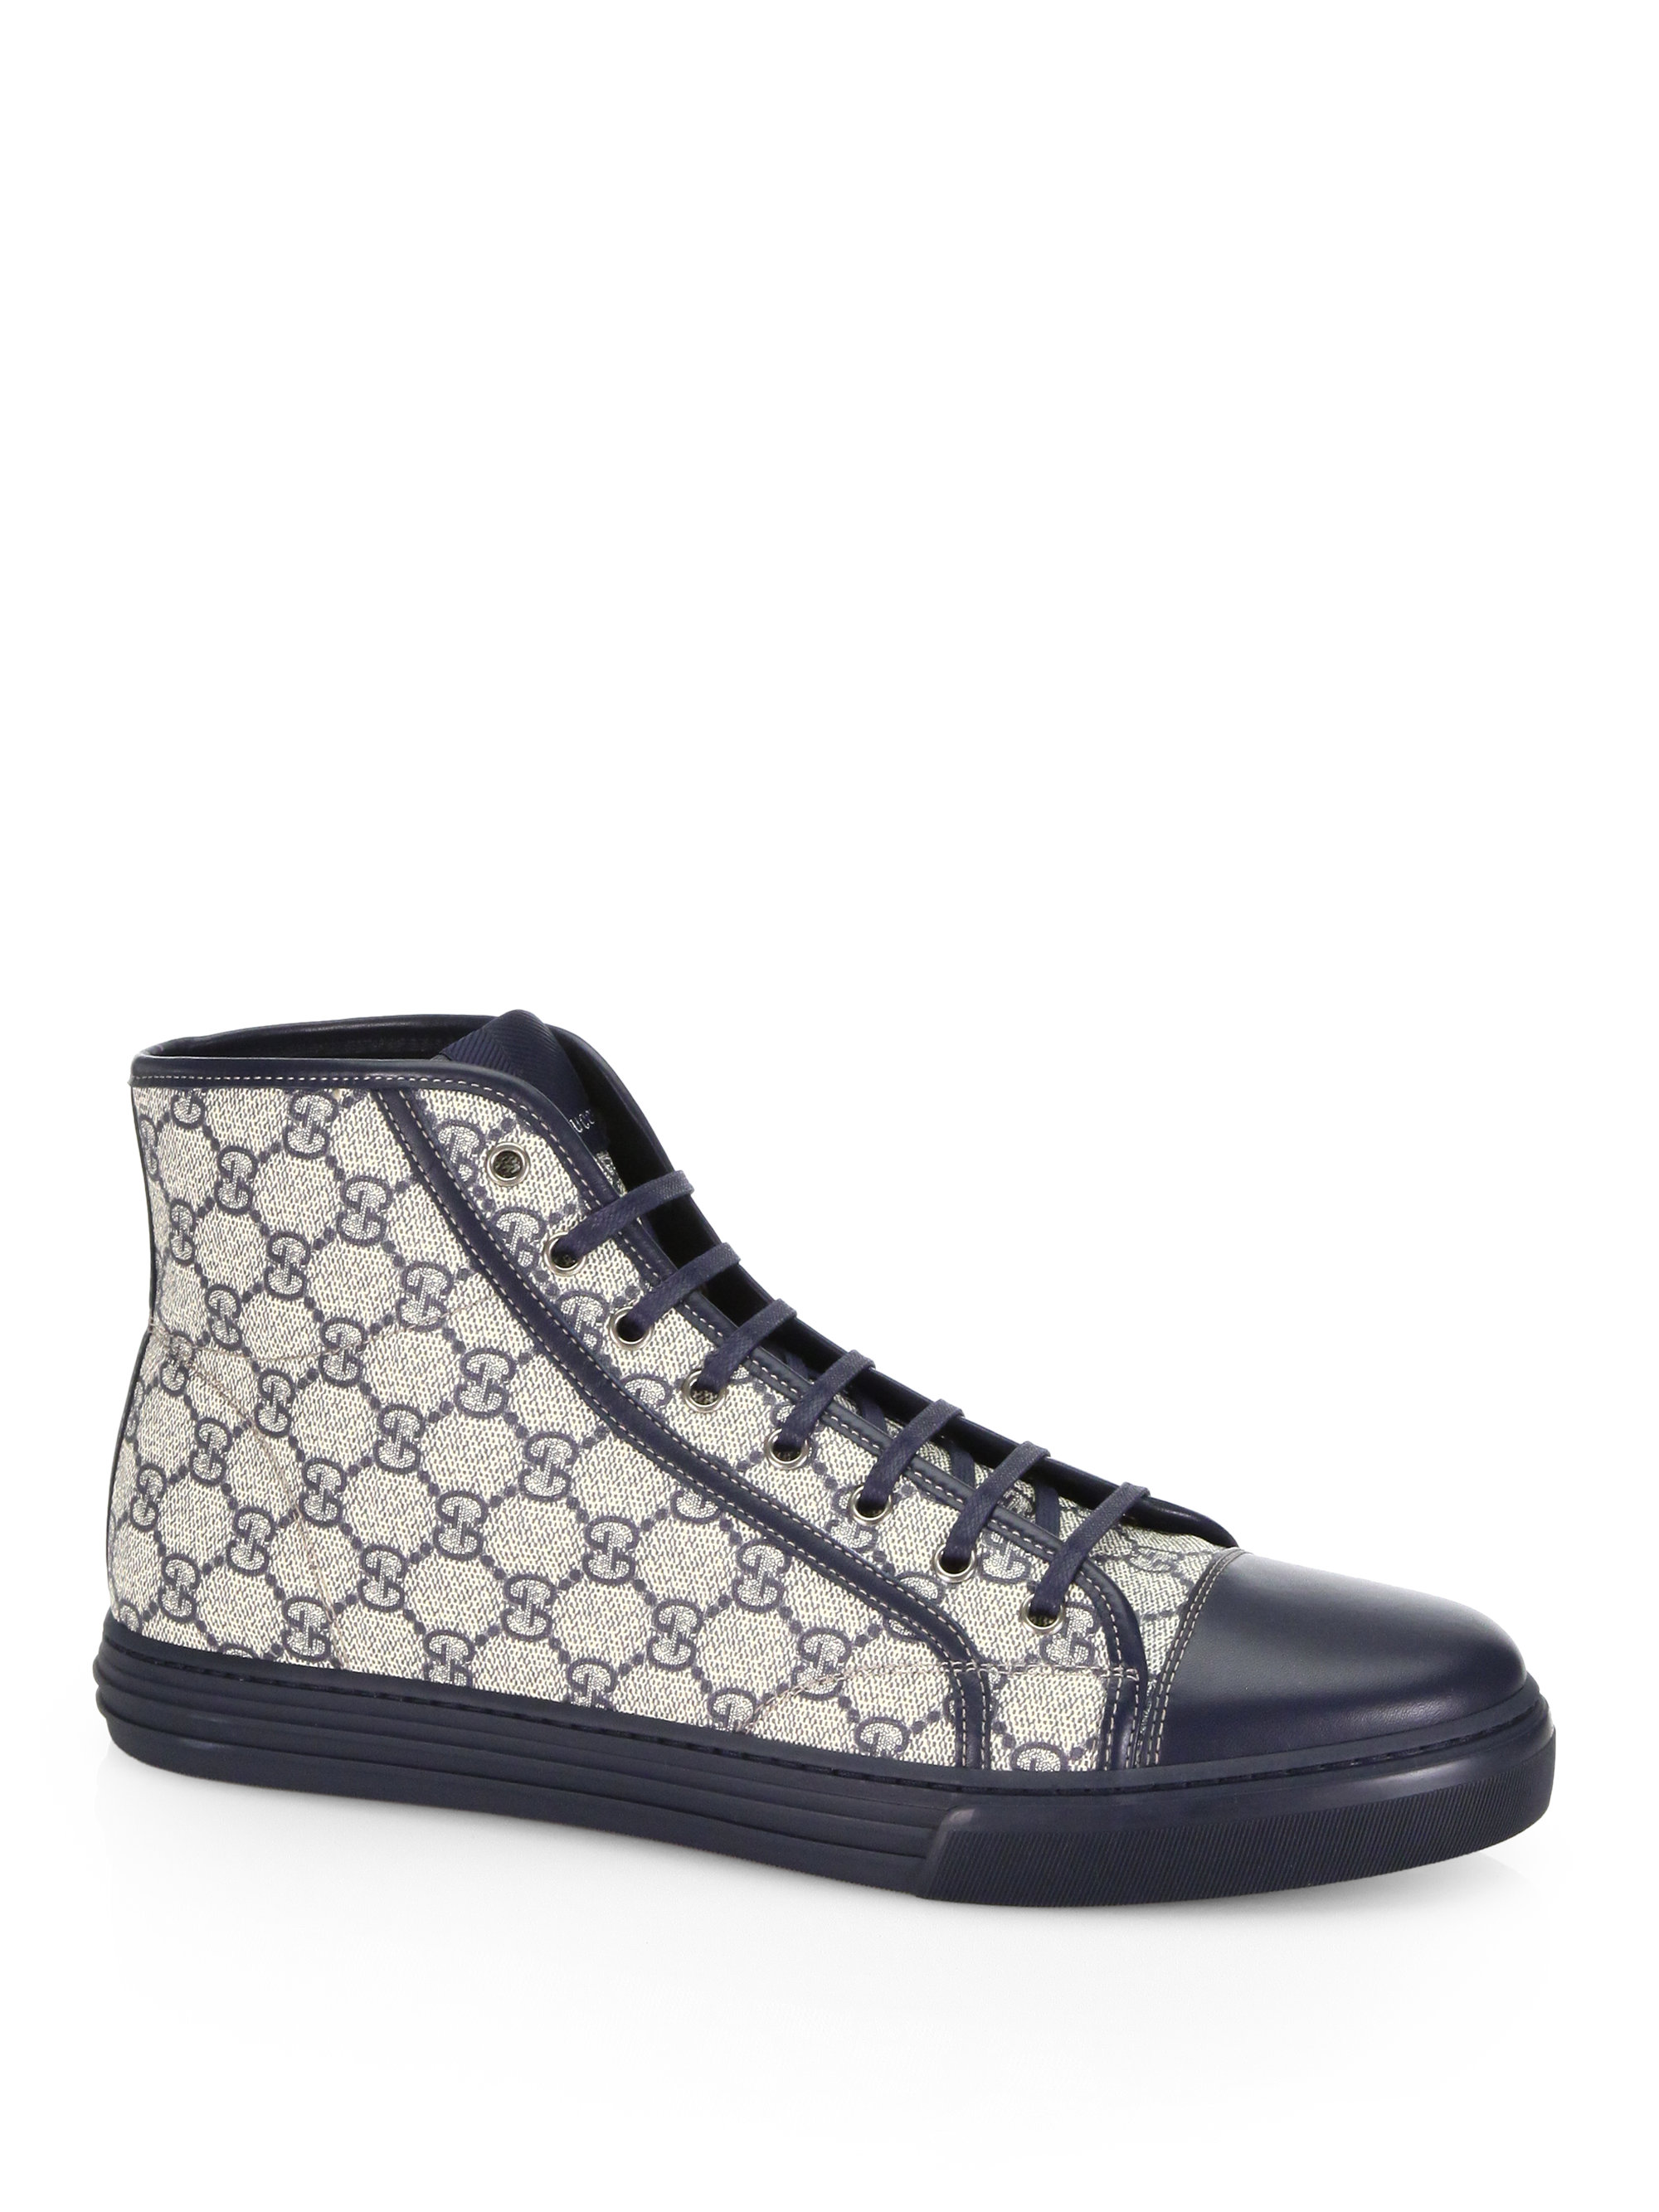 Gucci California Gg Plus High-Top Sneakers in Blue (Gray) for Men - Lyst